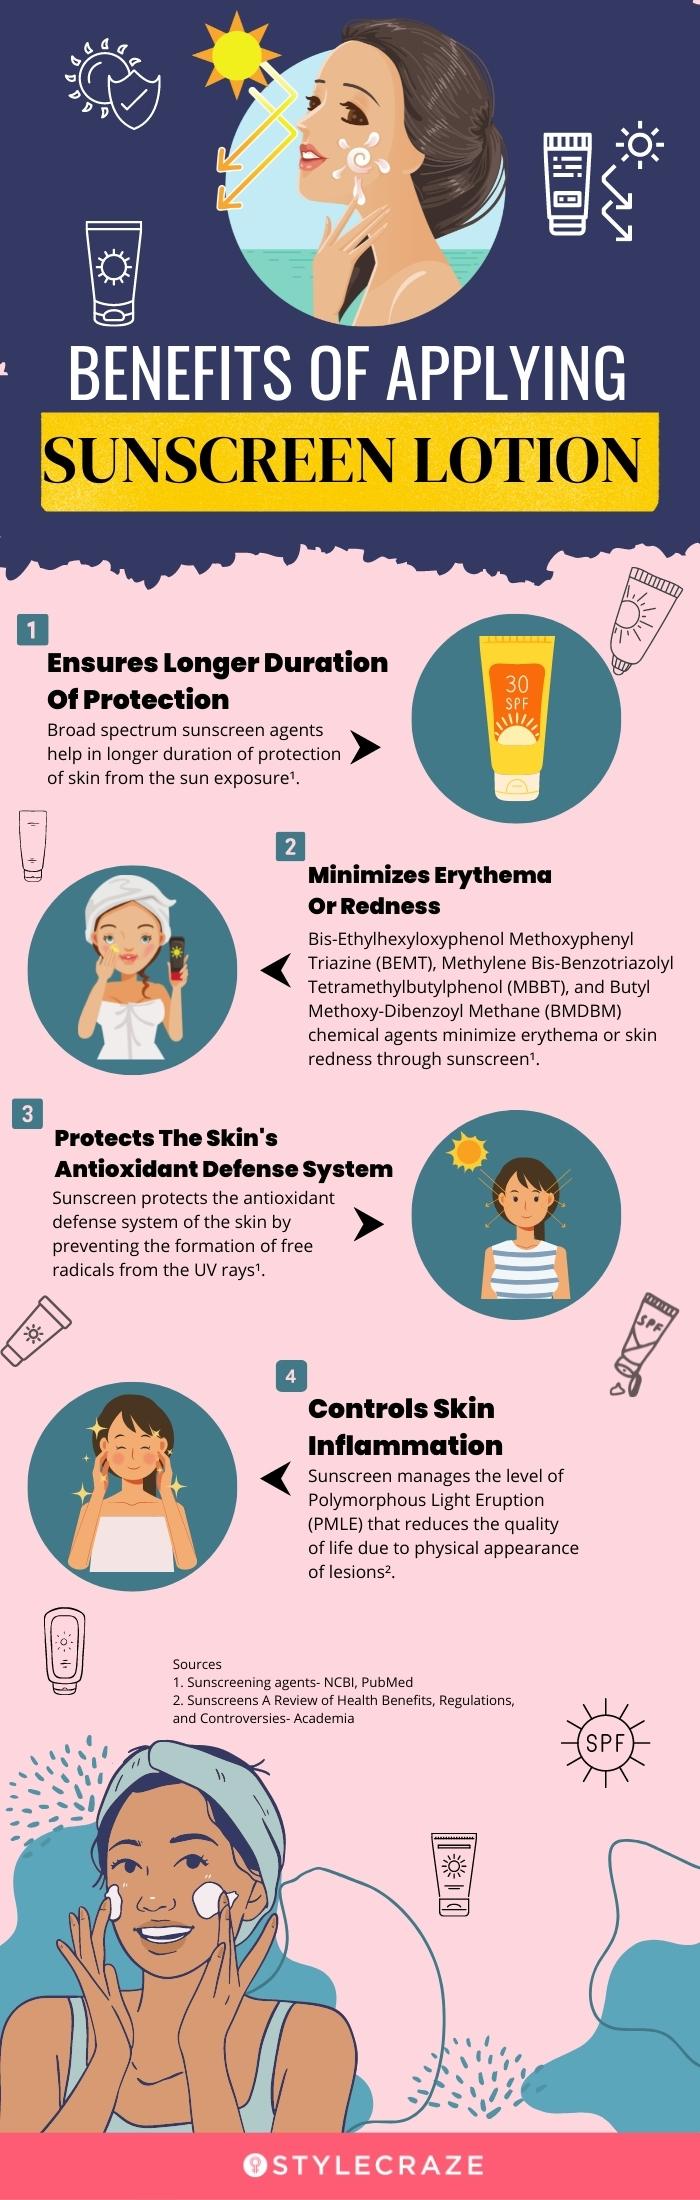 benefits of applying sunscreen lotion (infographic)